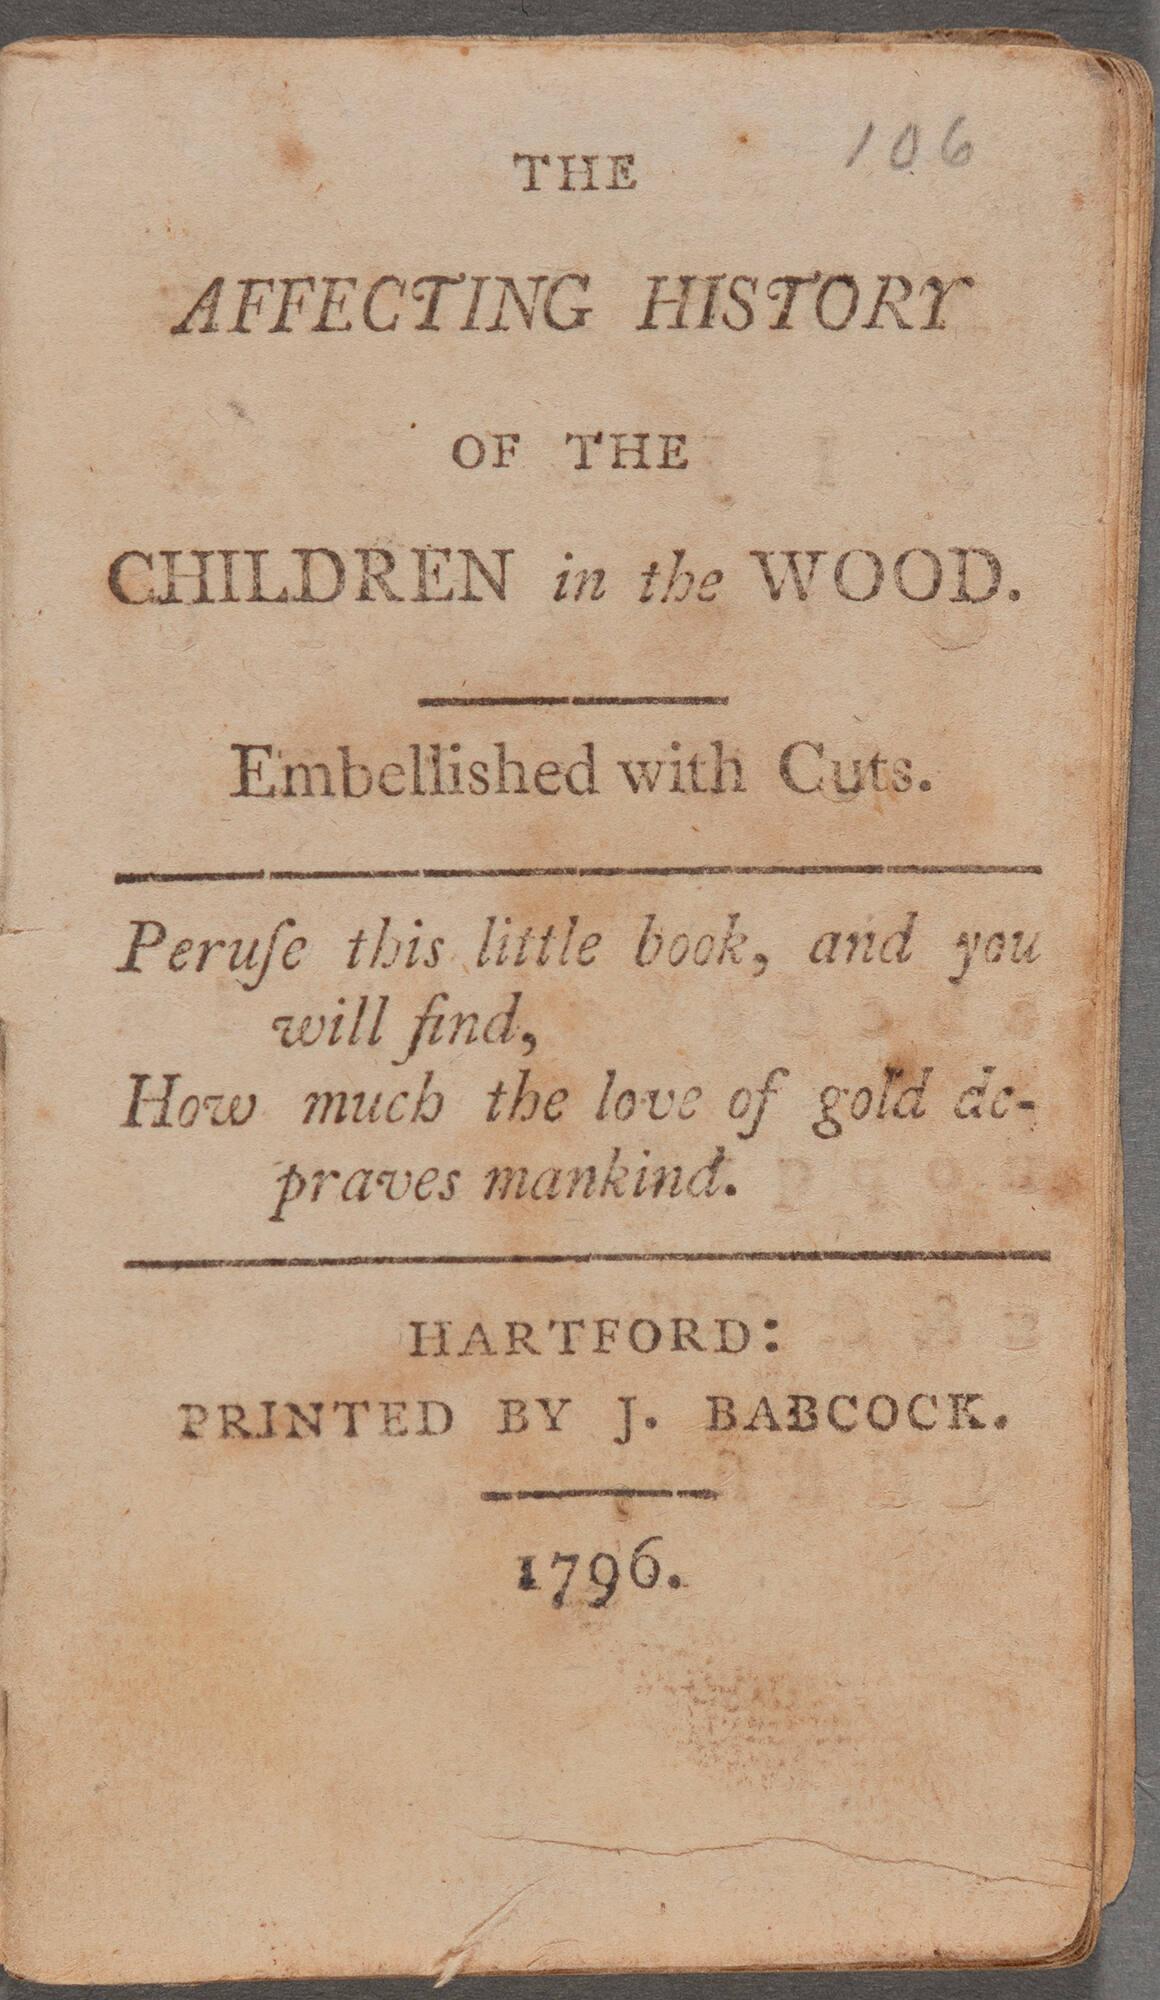 A photograph of a page from a book titled The Affecting History of the Children in the Wood that is discolored and worn due to age with printed text in black ink.